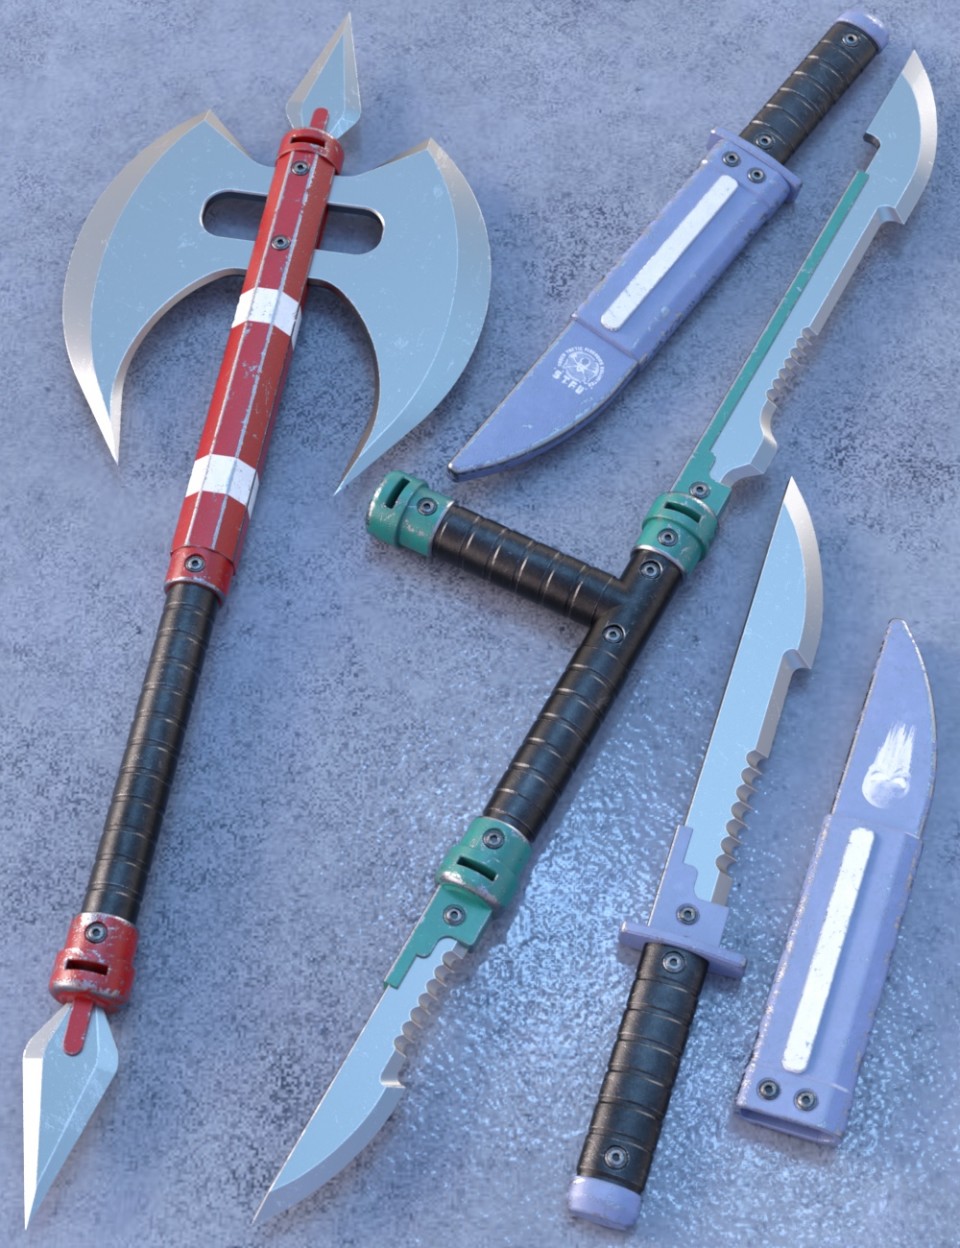 Blade Weapons 3 for Genesis 3 and 8_DAZ3D下载站